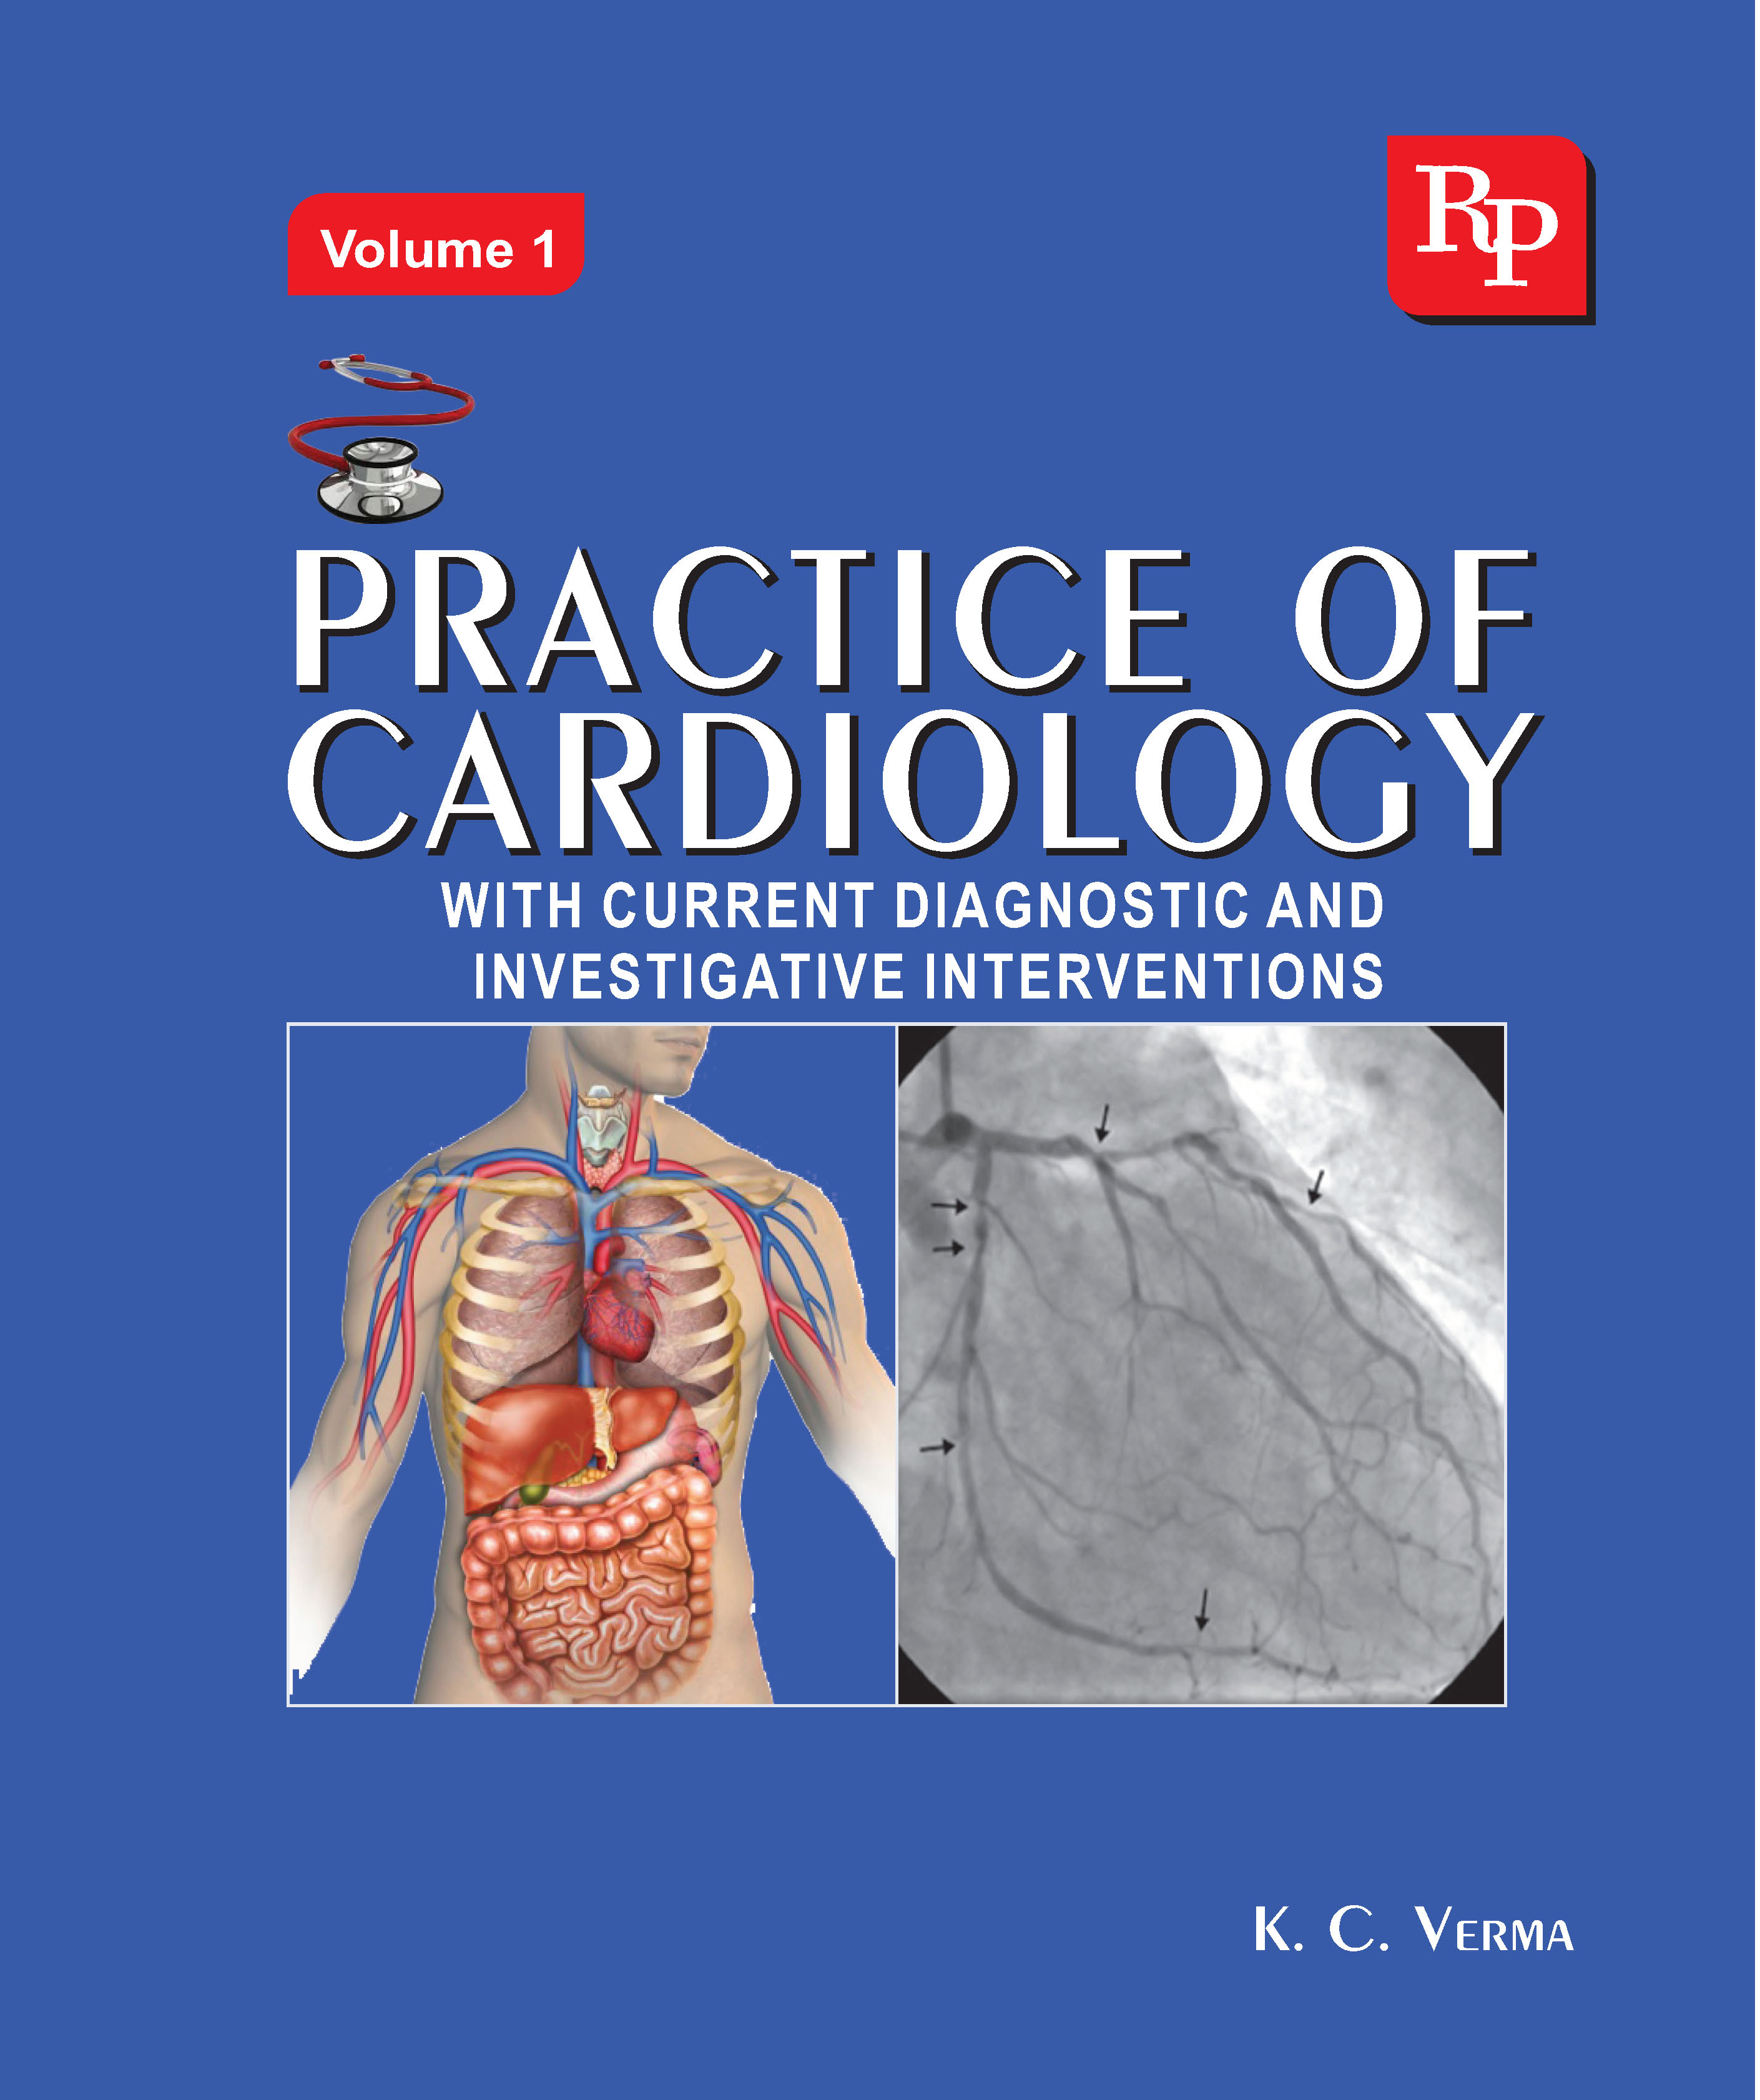 Practice of Cardiology Cover V-1.jpg